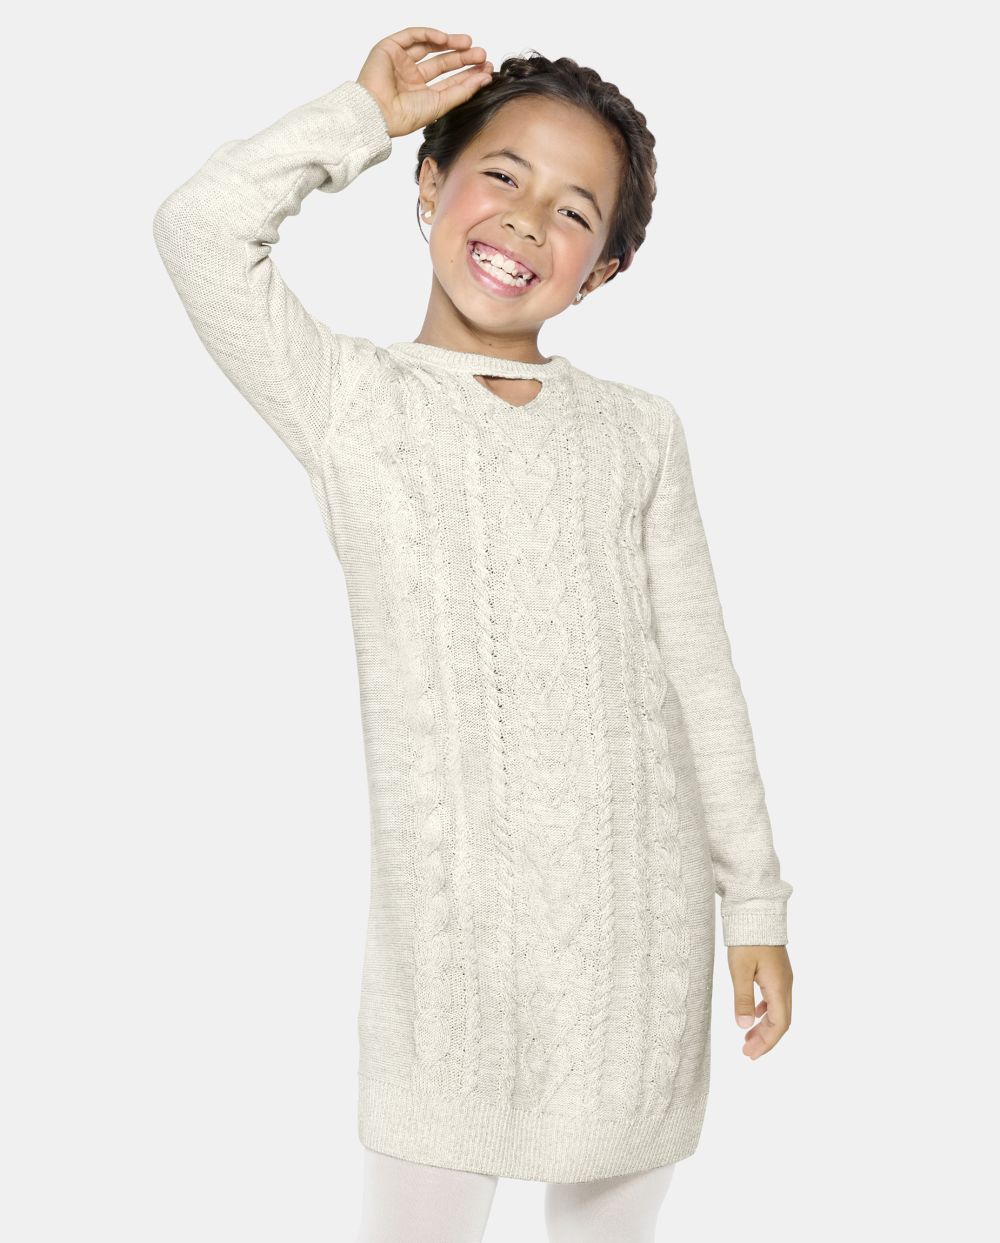 Girls Sweater Long Sleeves Cutout Above the Knee Crew Neck Dress